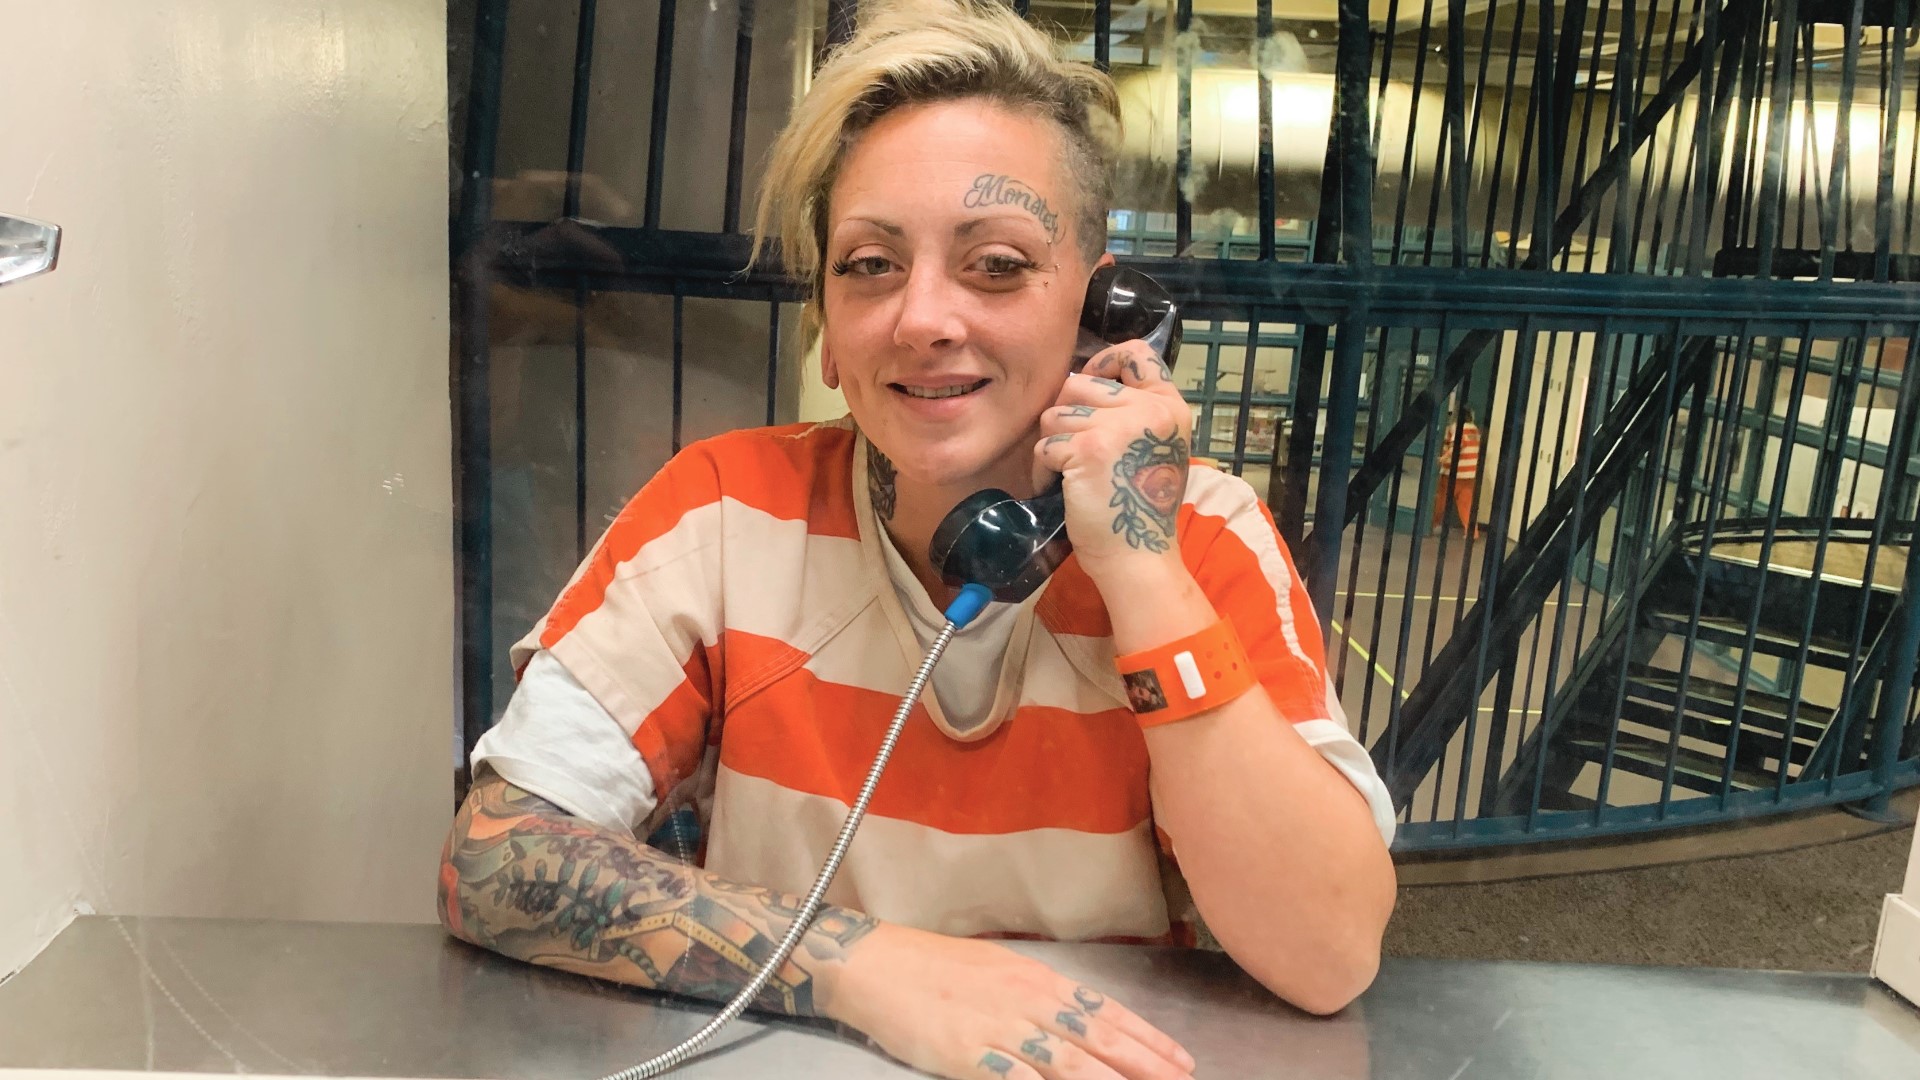 Megan Hawkins, AKA "Monster" from Netflix's "Jailbirds" show is back in a Sacramento jail. She said that she's trying to prove her innocence and set a positive example.